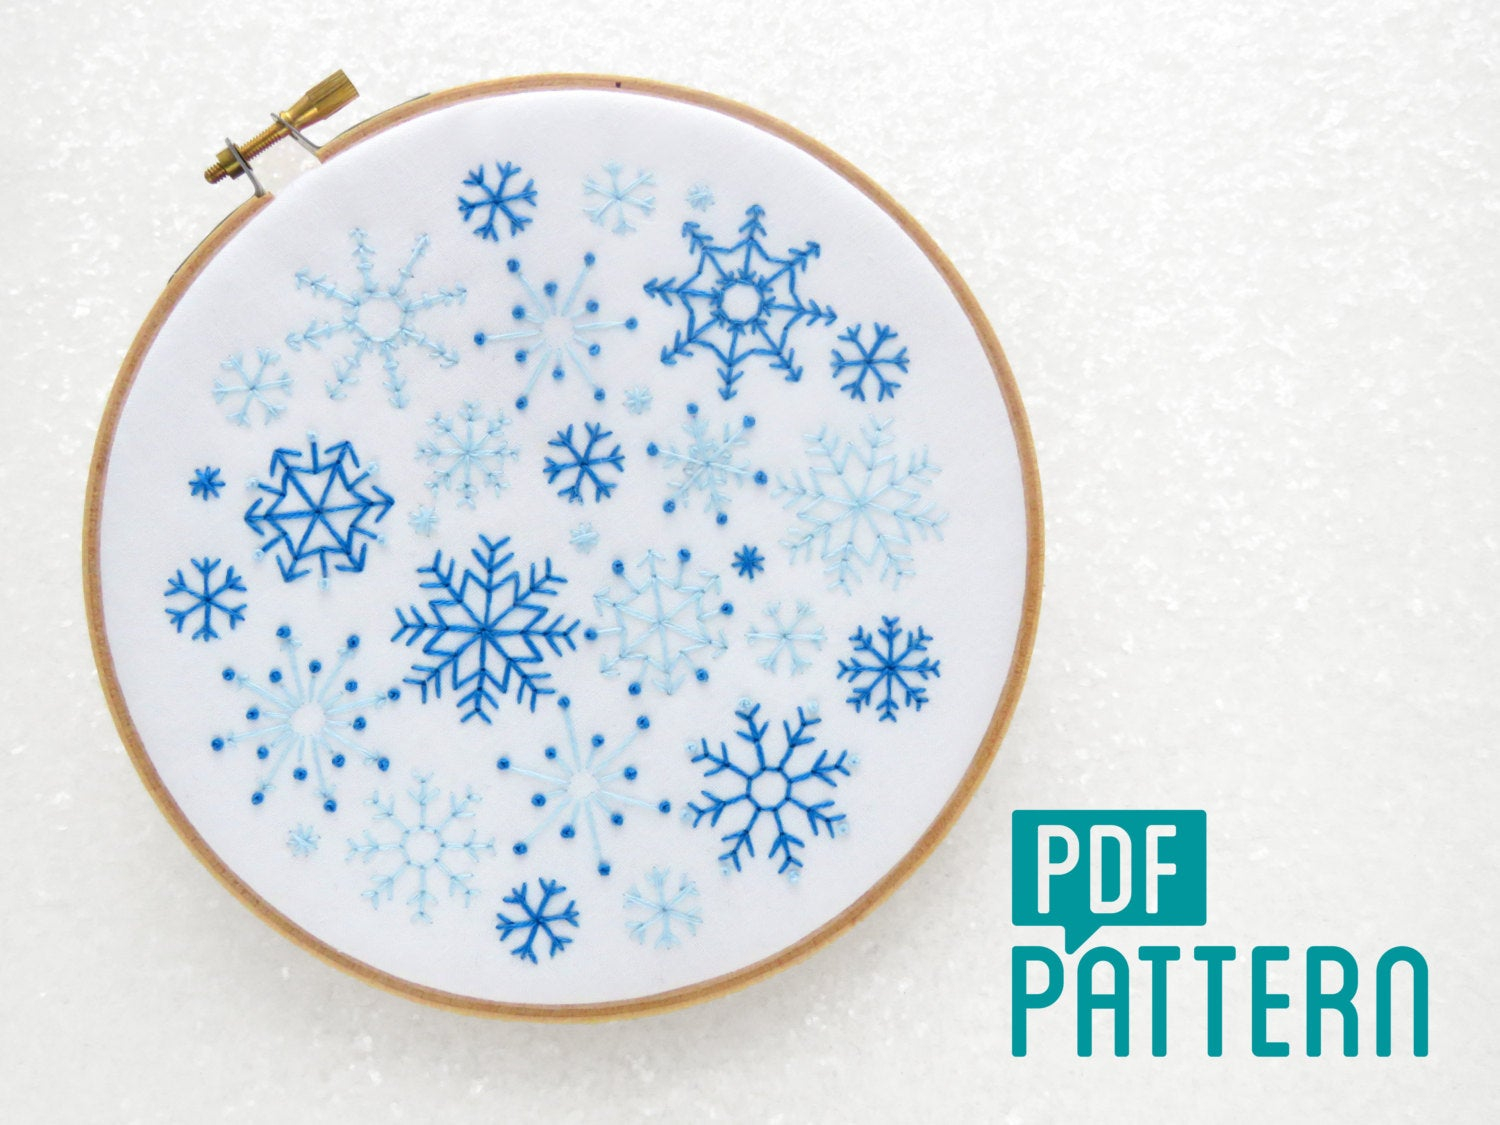 Snowflake Embroidery Pattern Snowflakes Embroidery Pattern Snow Needlework Pattern Christmas Embroidery Xmas Hoop Art Pattern Diy Christmas Decor Winter Embroidery